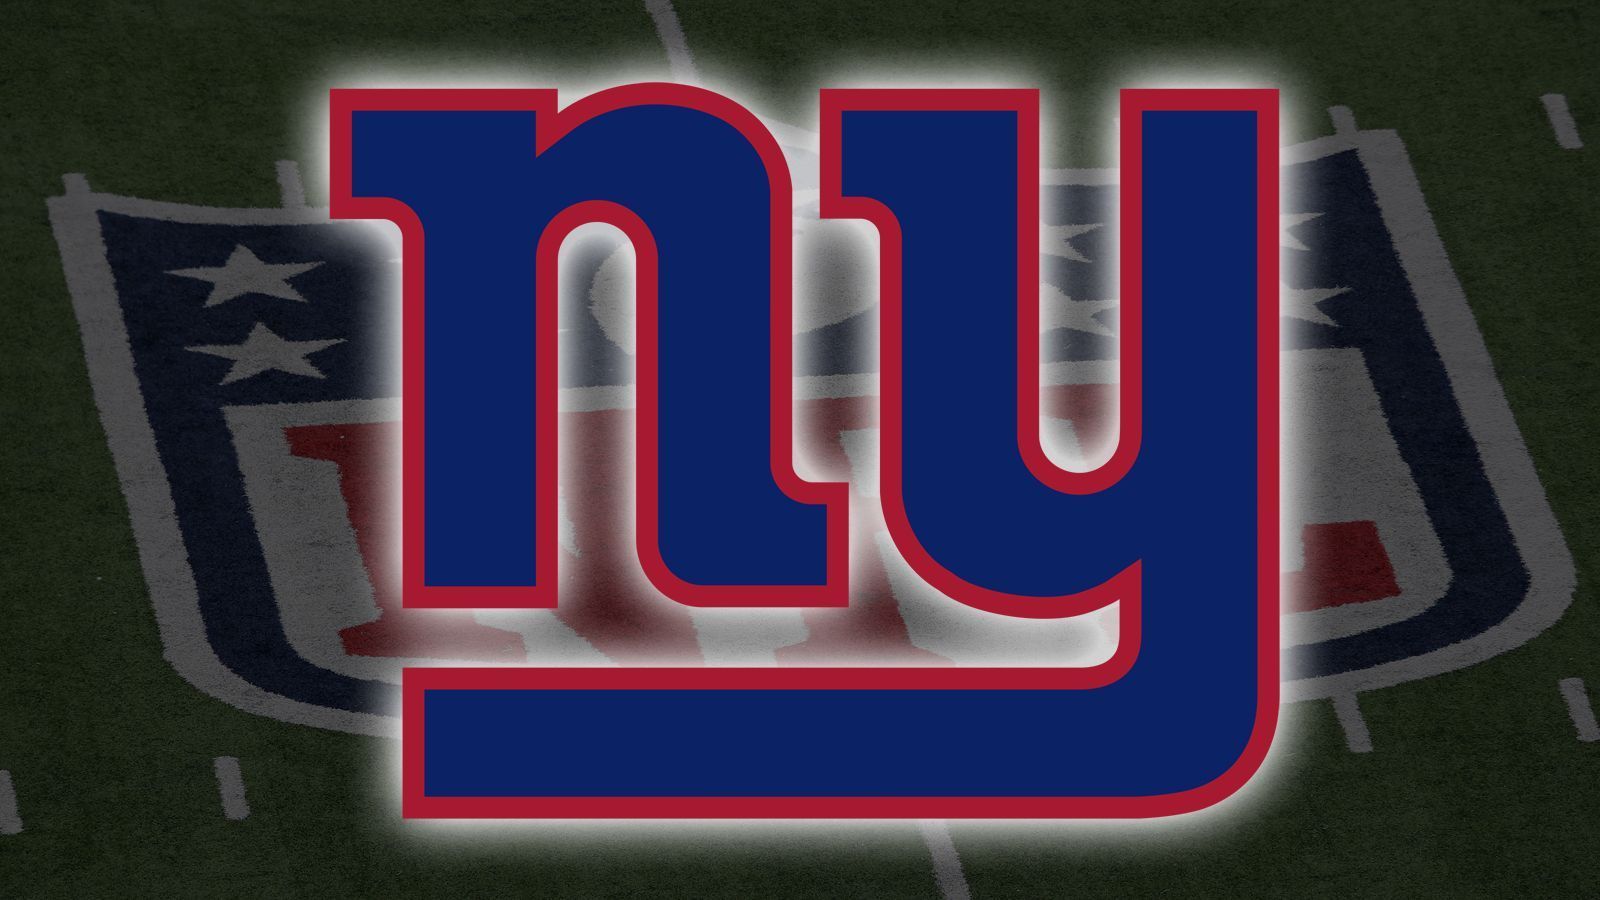 
                <strong>New York Giants</strong><br>
                
              